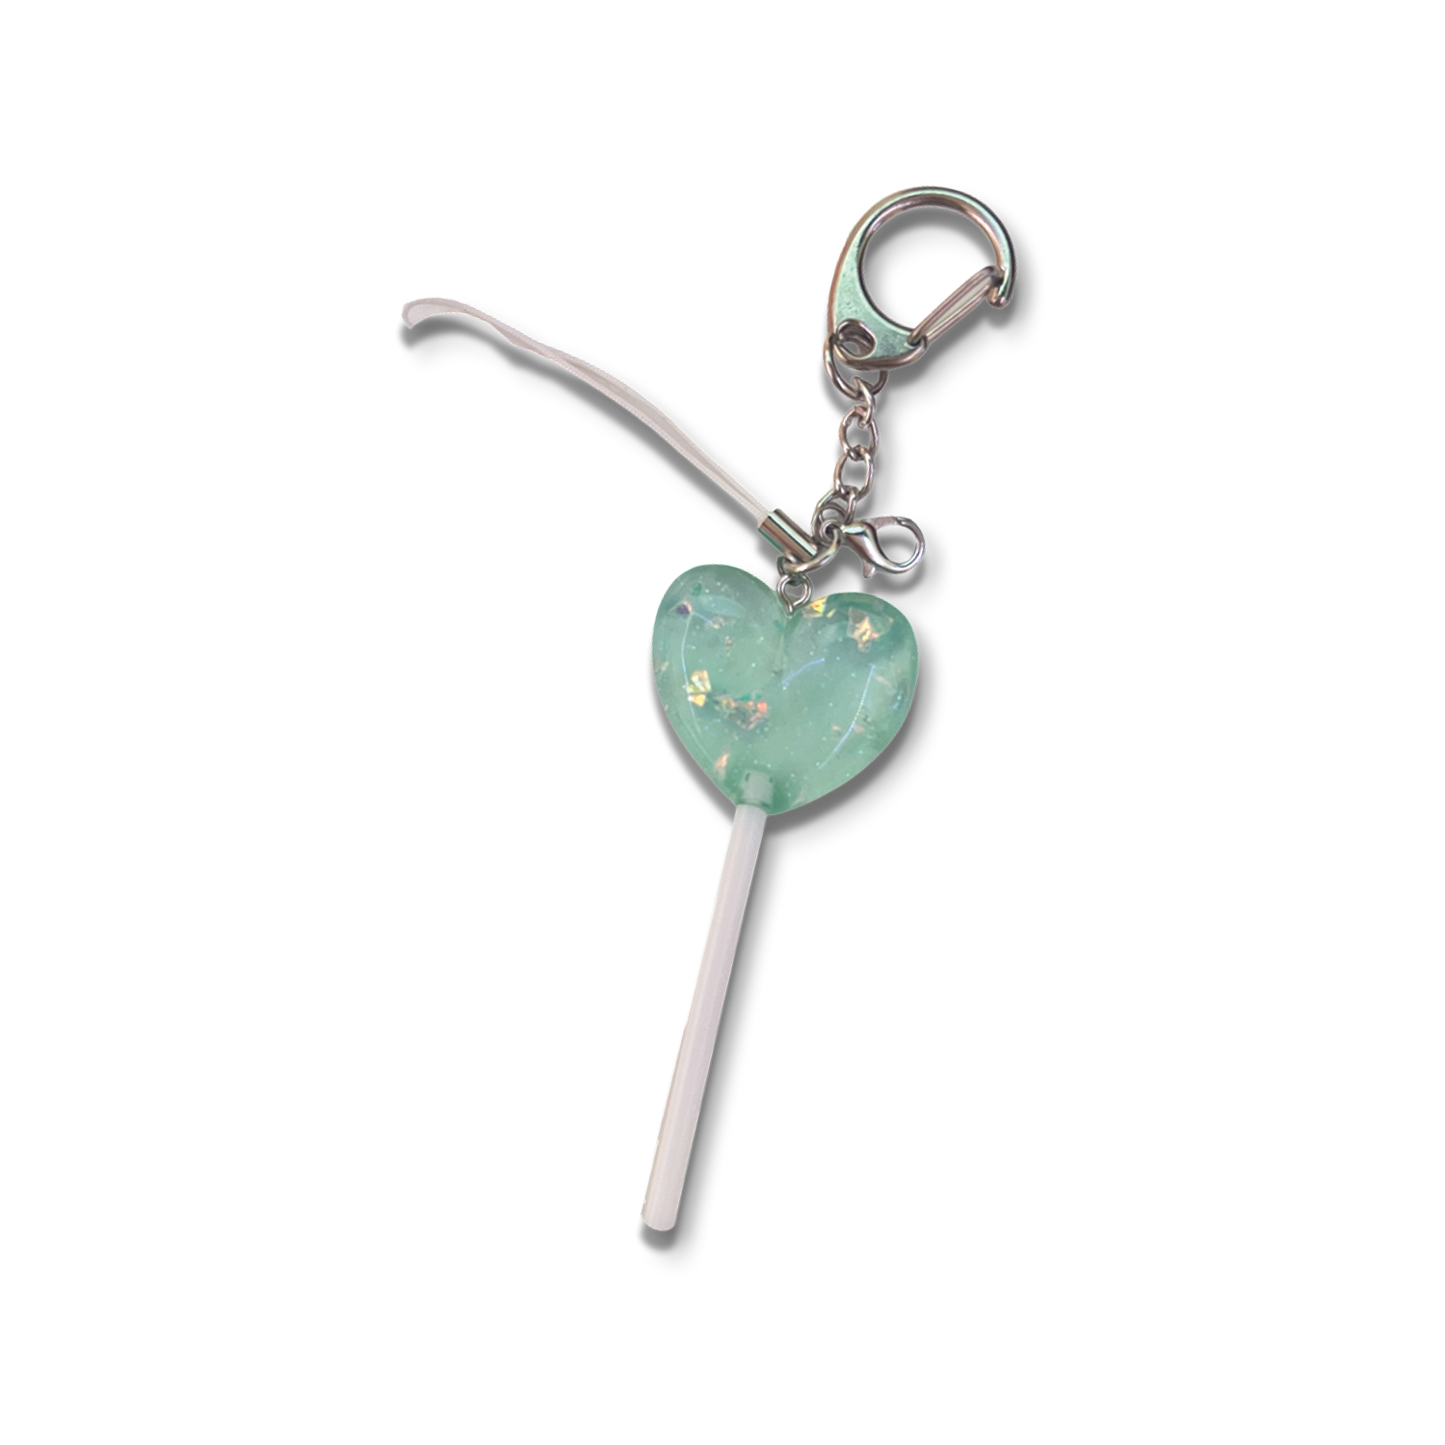 Big blue sparkly lollipop with keychain and basic white phone strap.